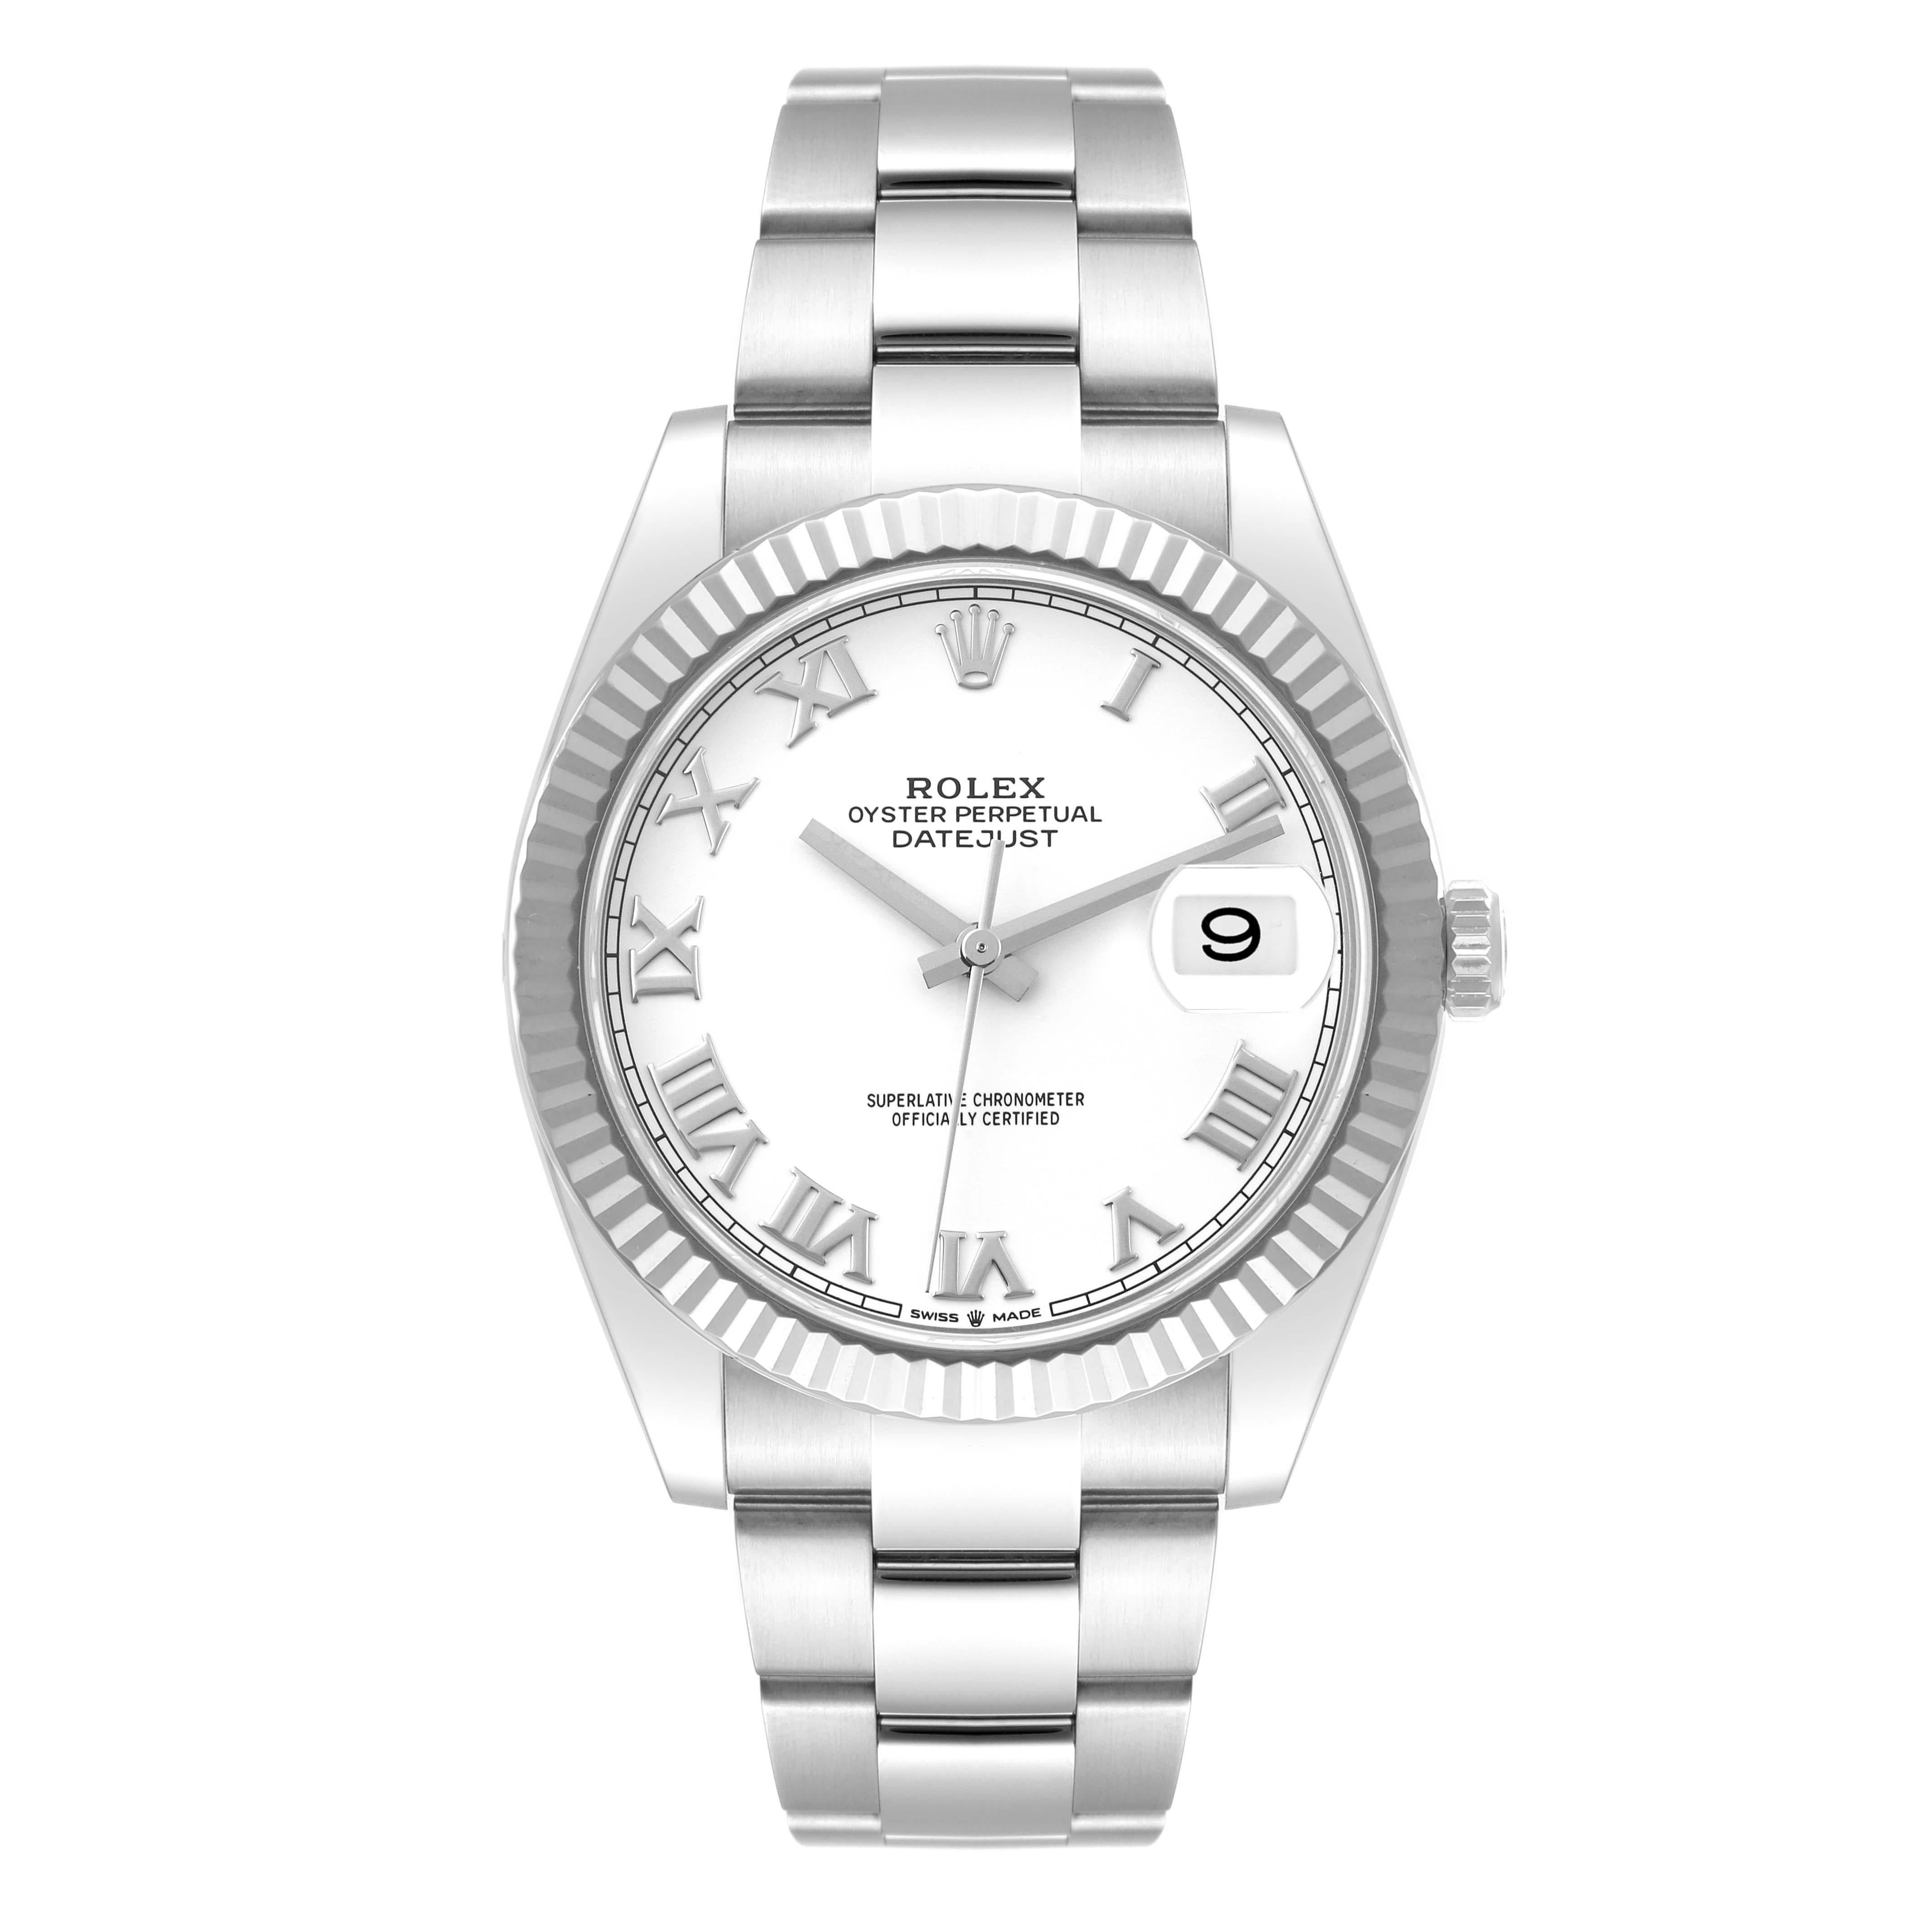 Rolex Datejust 41 Steel White Gold Roman Dial Mens Watch 126334 Box Card. Officially certified chronometer automatic self-winding movement. Stainless steel case 41 mm in diameter. Rolex logo on the crown. 18K white gold fluted bezel. Scratch